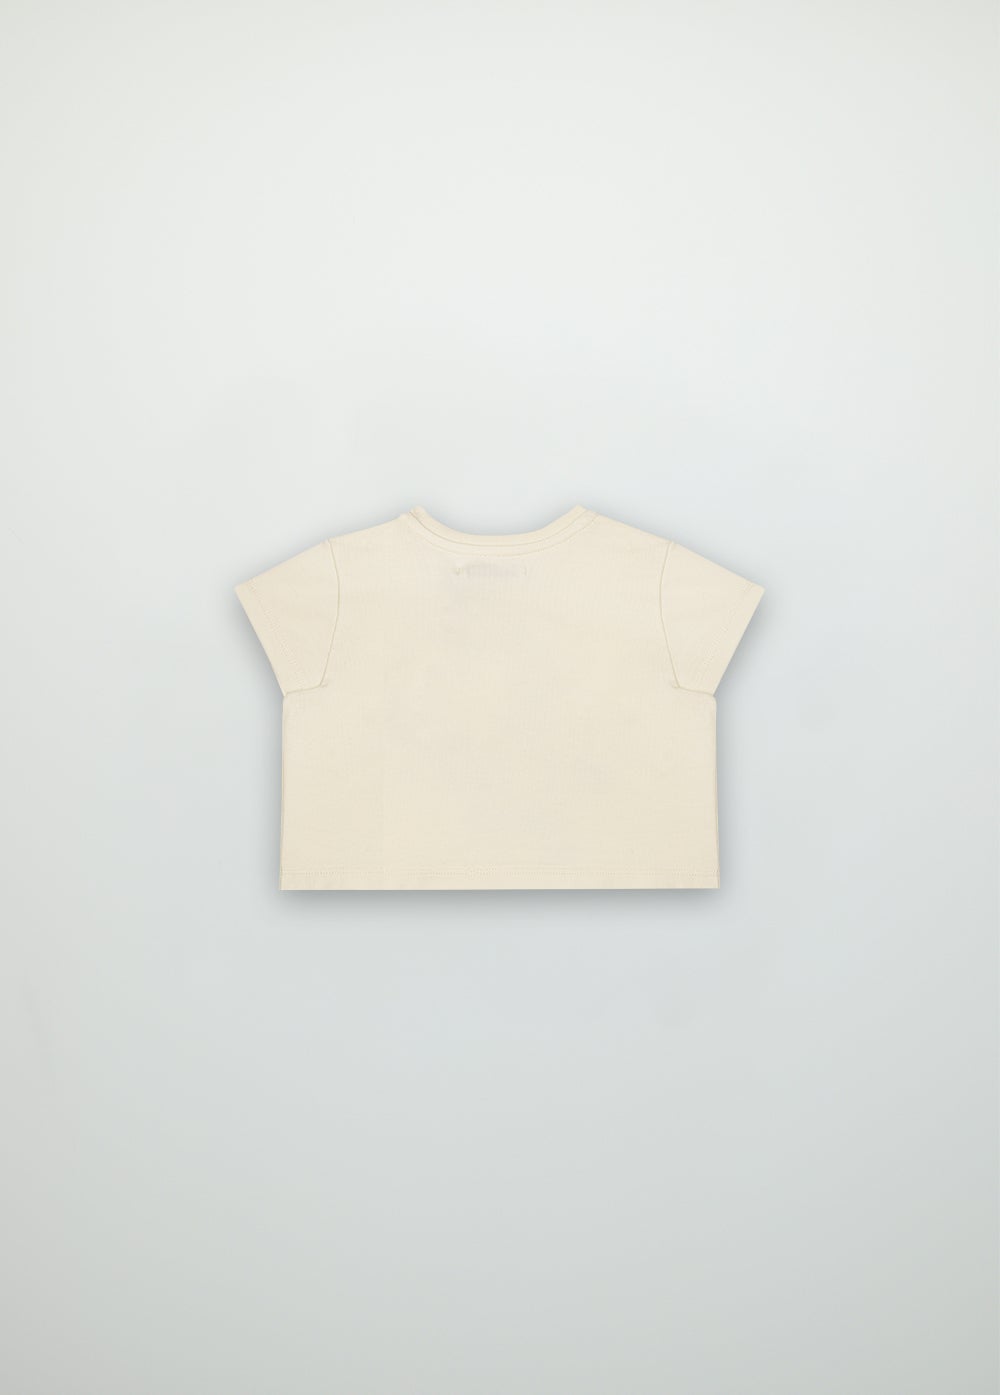 Positional Baby Tee 2 Tops The New Society 